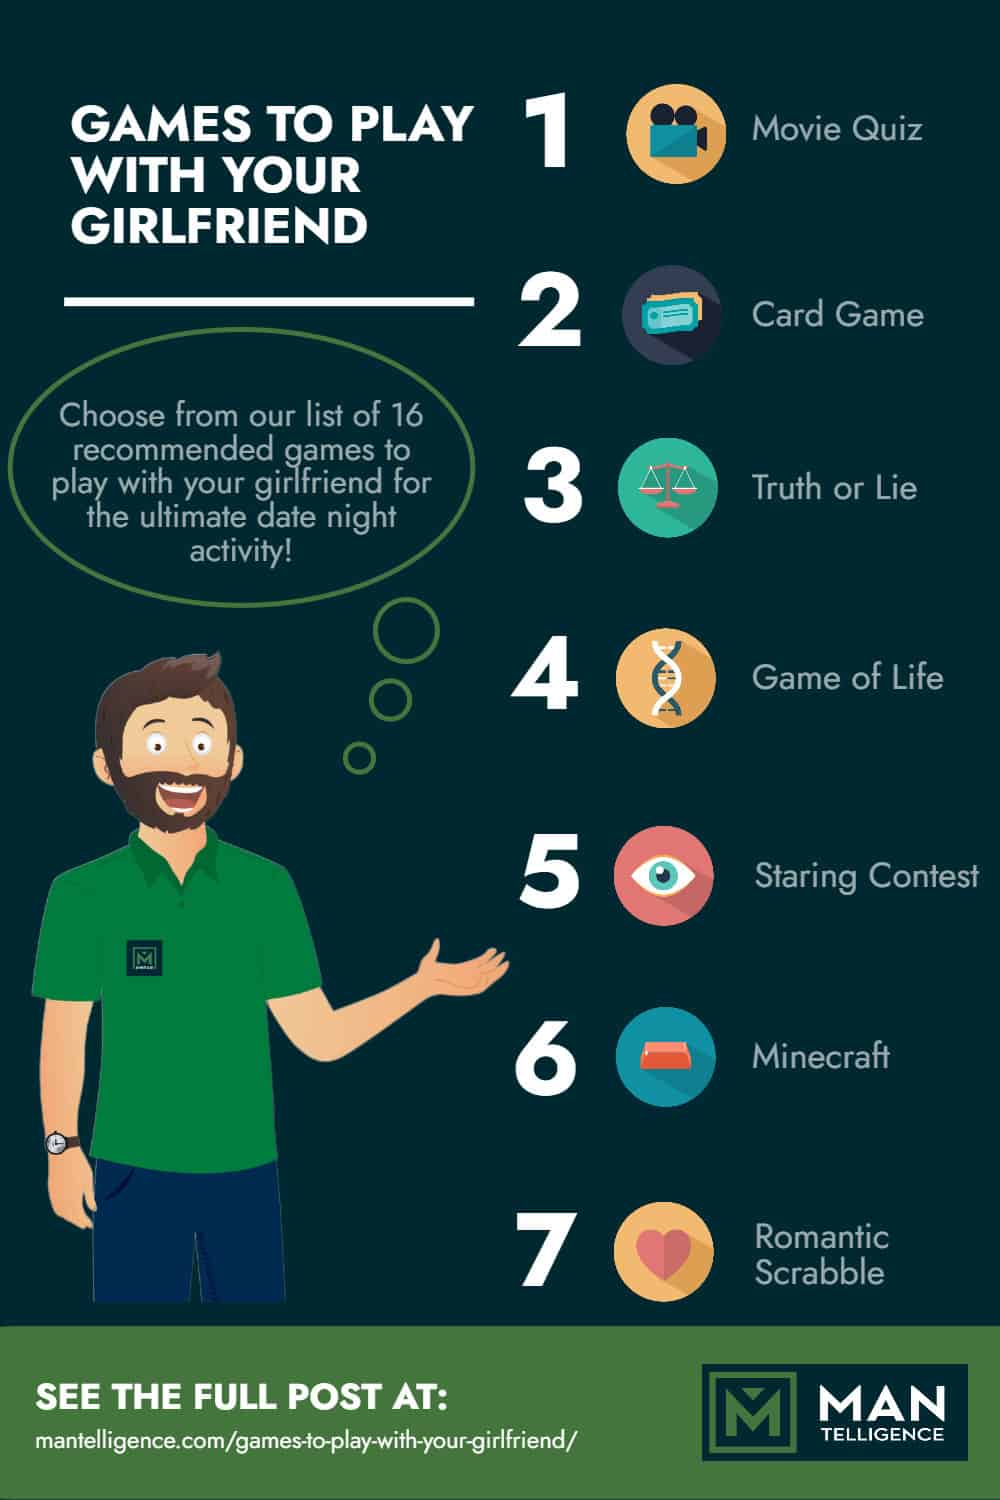 Games To Play With Your Girlfriend Infographic 1 